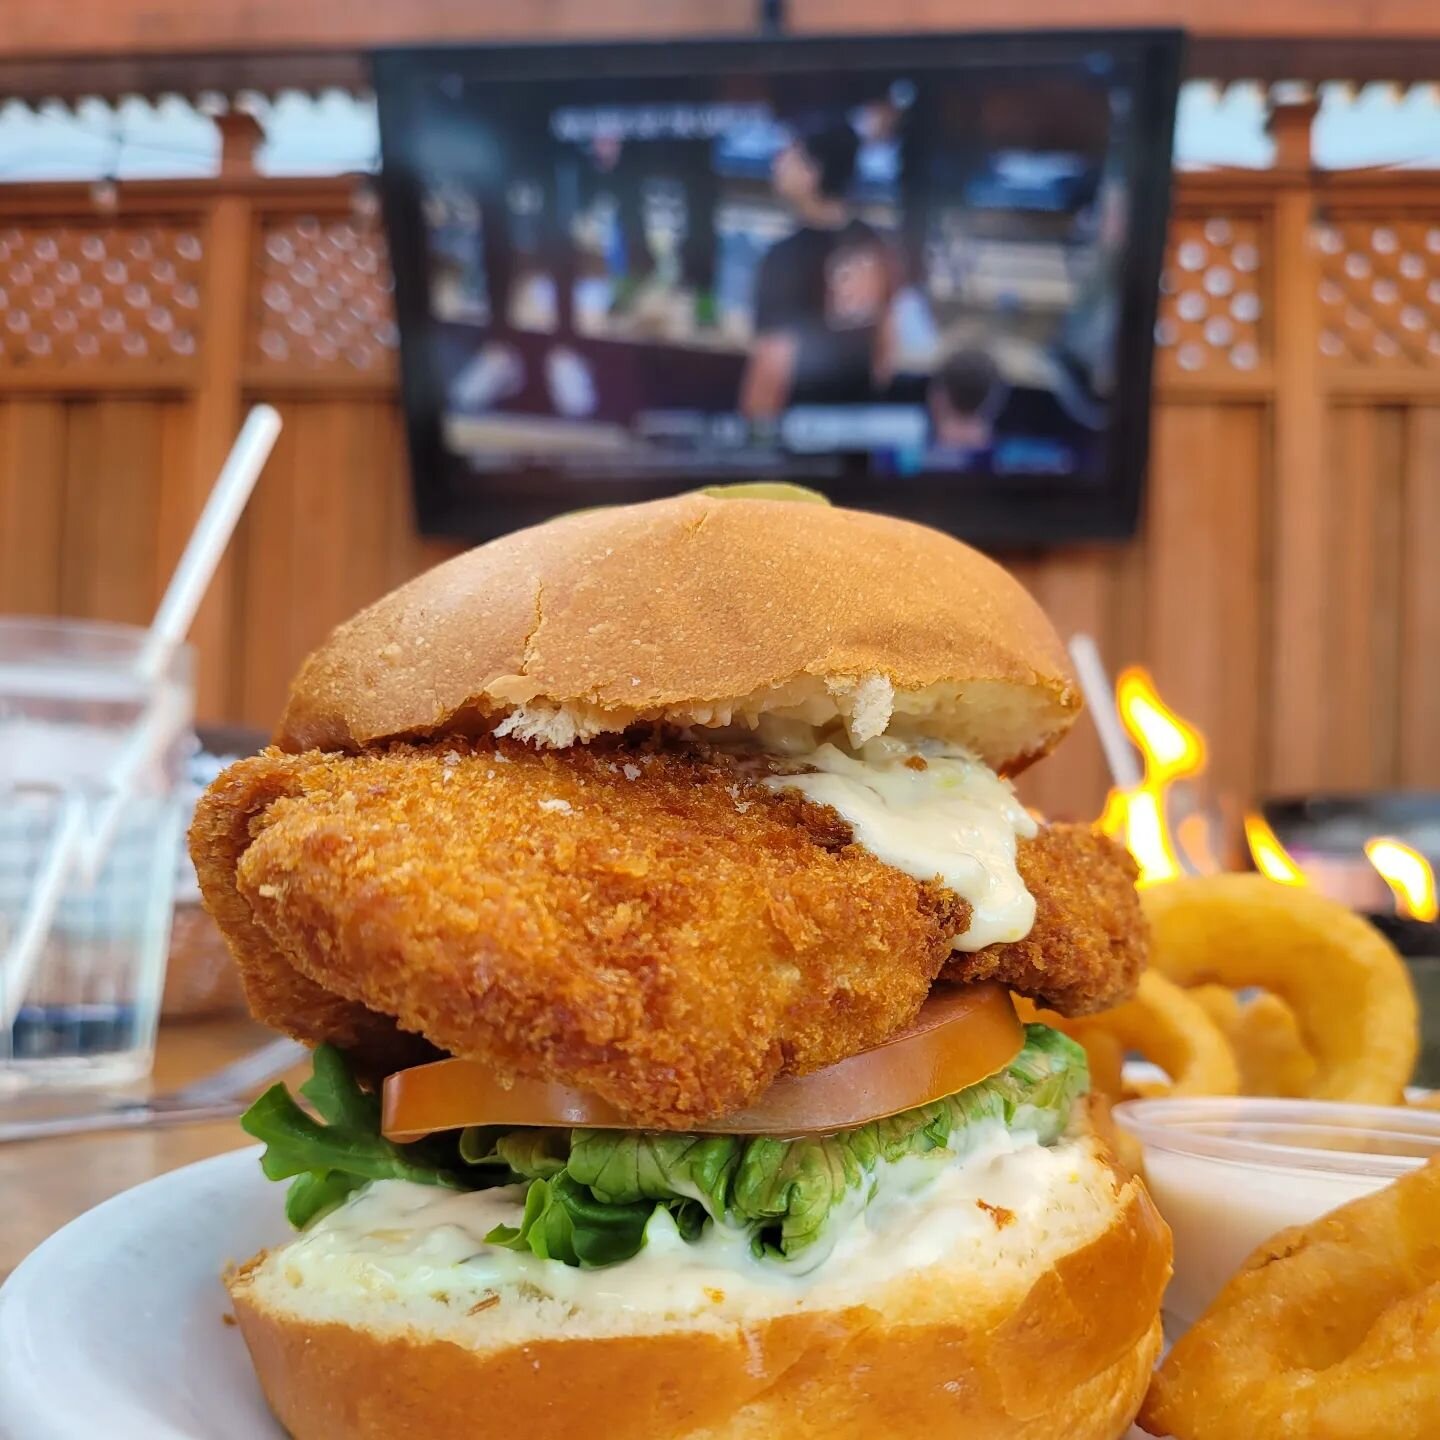 It's one of the overlooked sandwiches on our menu but one of my faves: The Sole Fish Sanwich. Coated in Japanese breadcrumbs with tartar sauce, lettuce, pickles, tomato in a buttery brioche bun, I love enjoying this with our beer battered onion rings